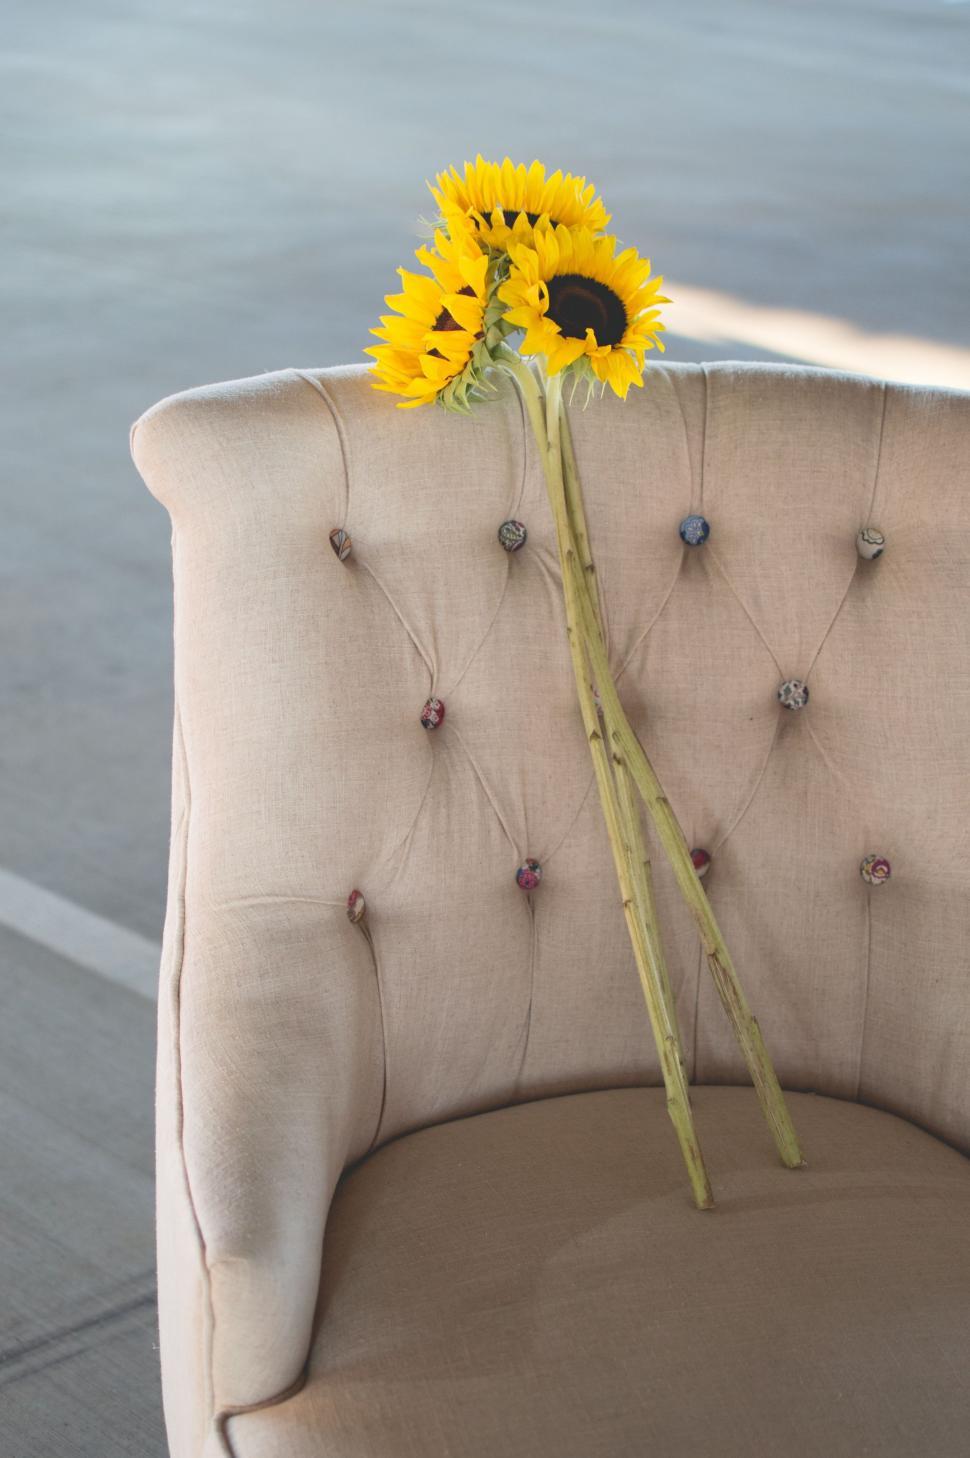 Free Image of Chair With Sunflower 